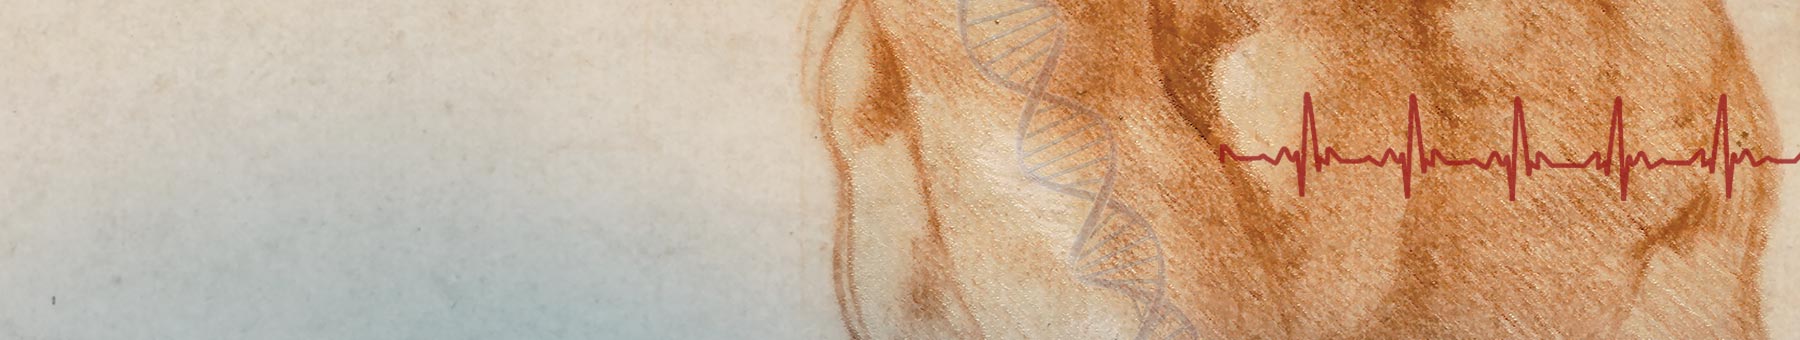 sketch by Michelangelo with a heart rate line and strand of DNA